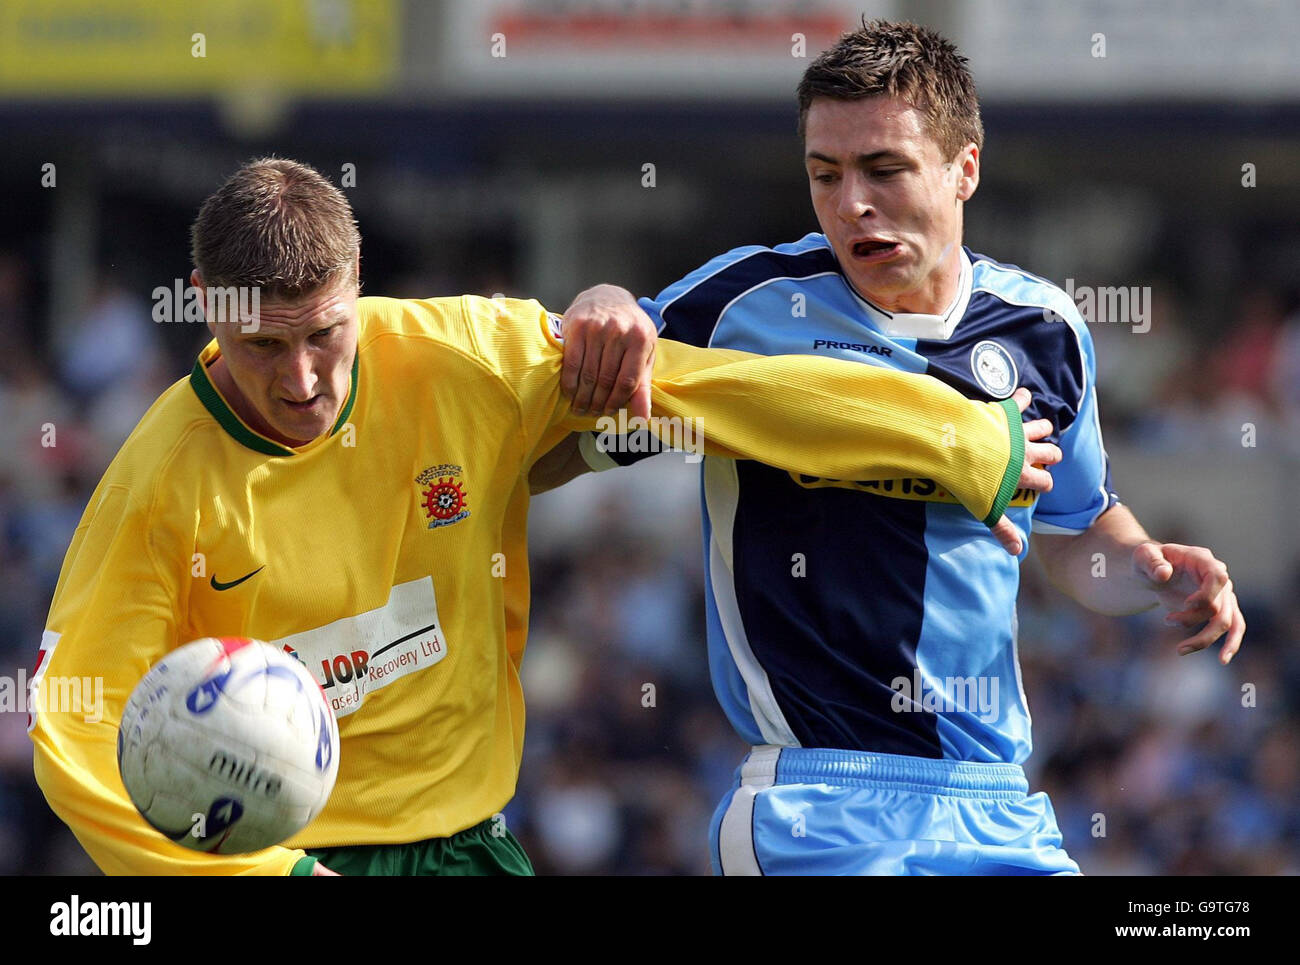 Wycombe's Russell Martin (right) tussles with Hartlepool's Eifion Williams during the Coca-Cola Football League Two match at Causeway Stadium, High Wycombe. Stock Photo